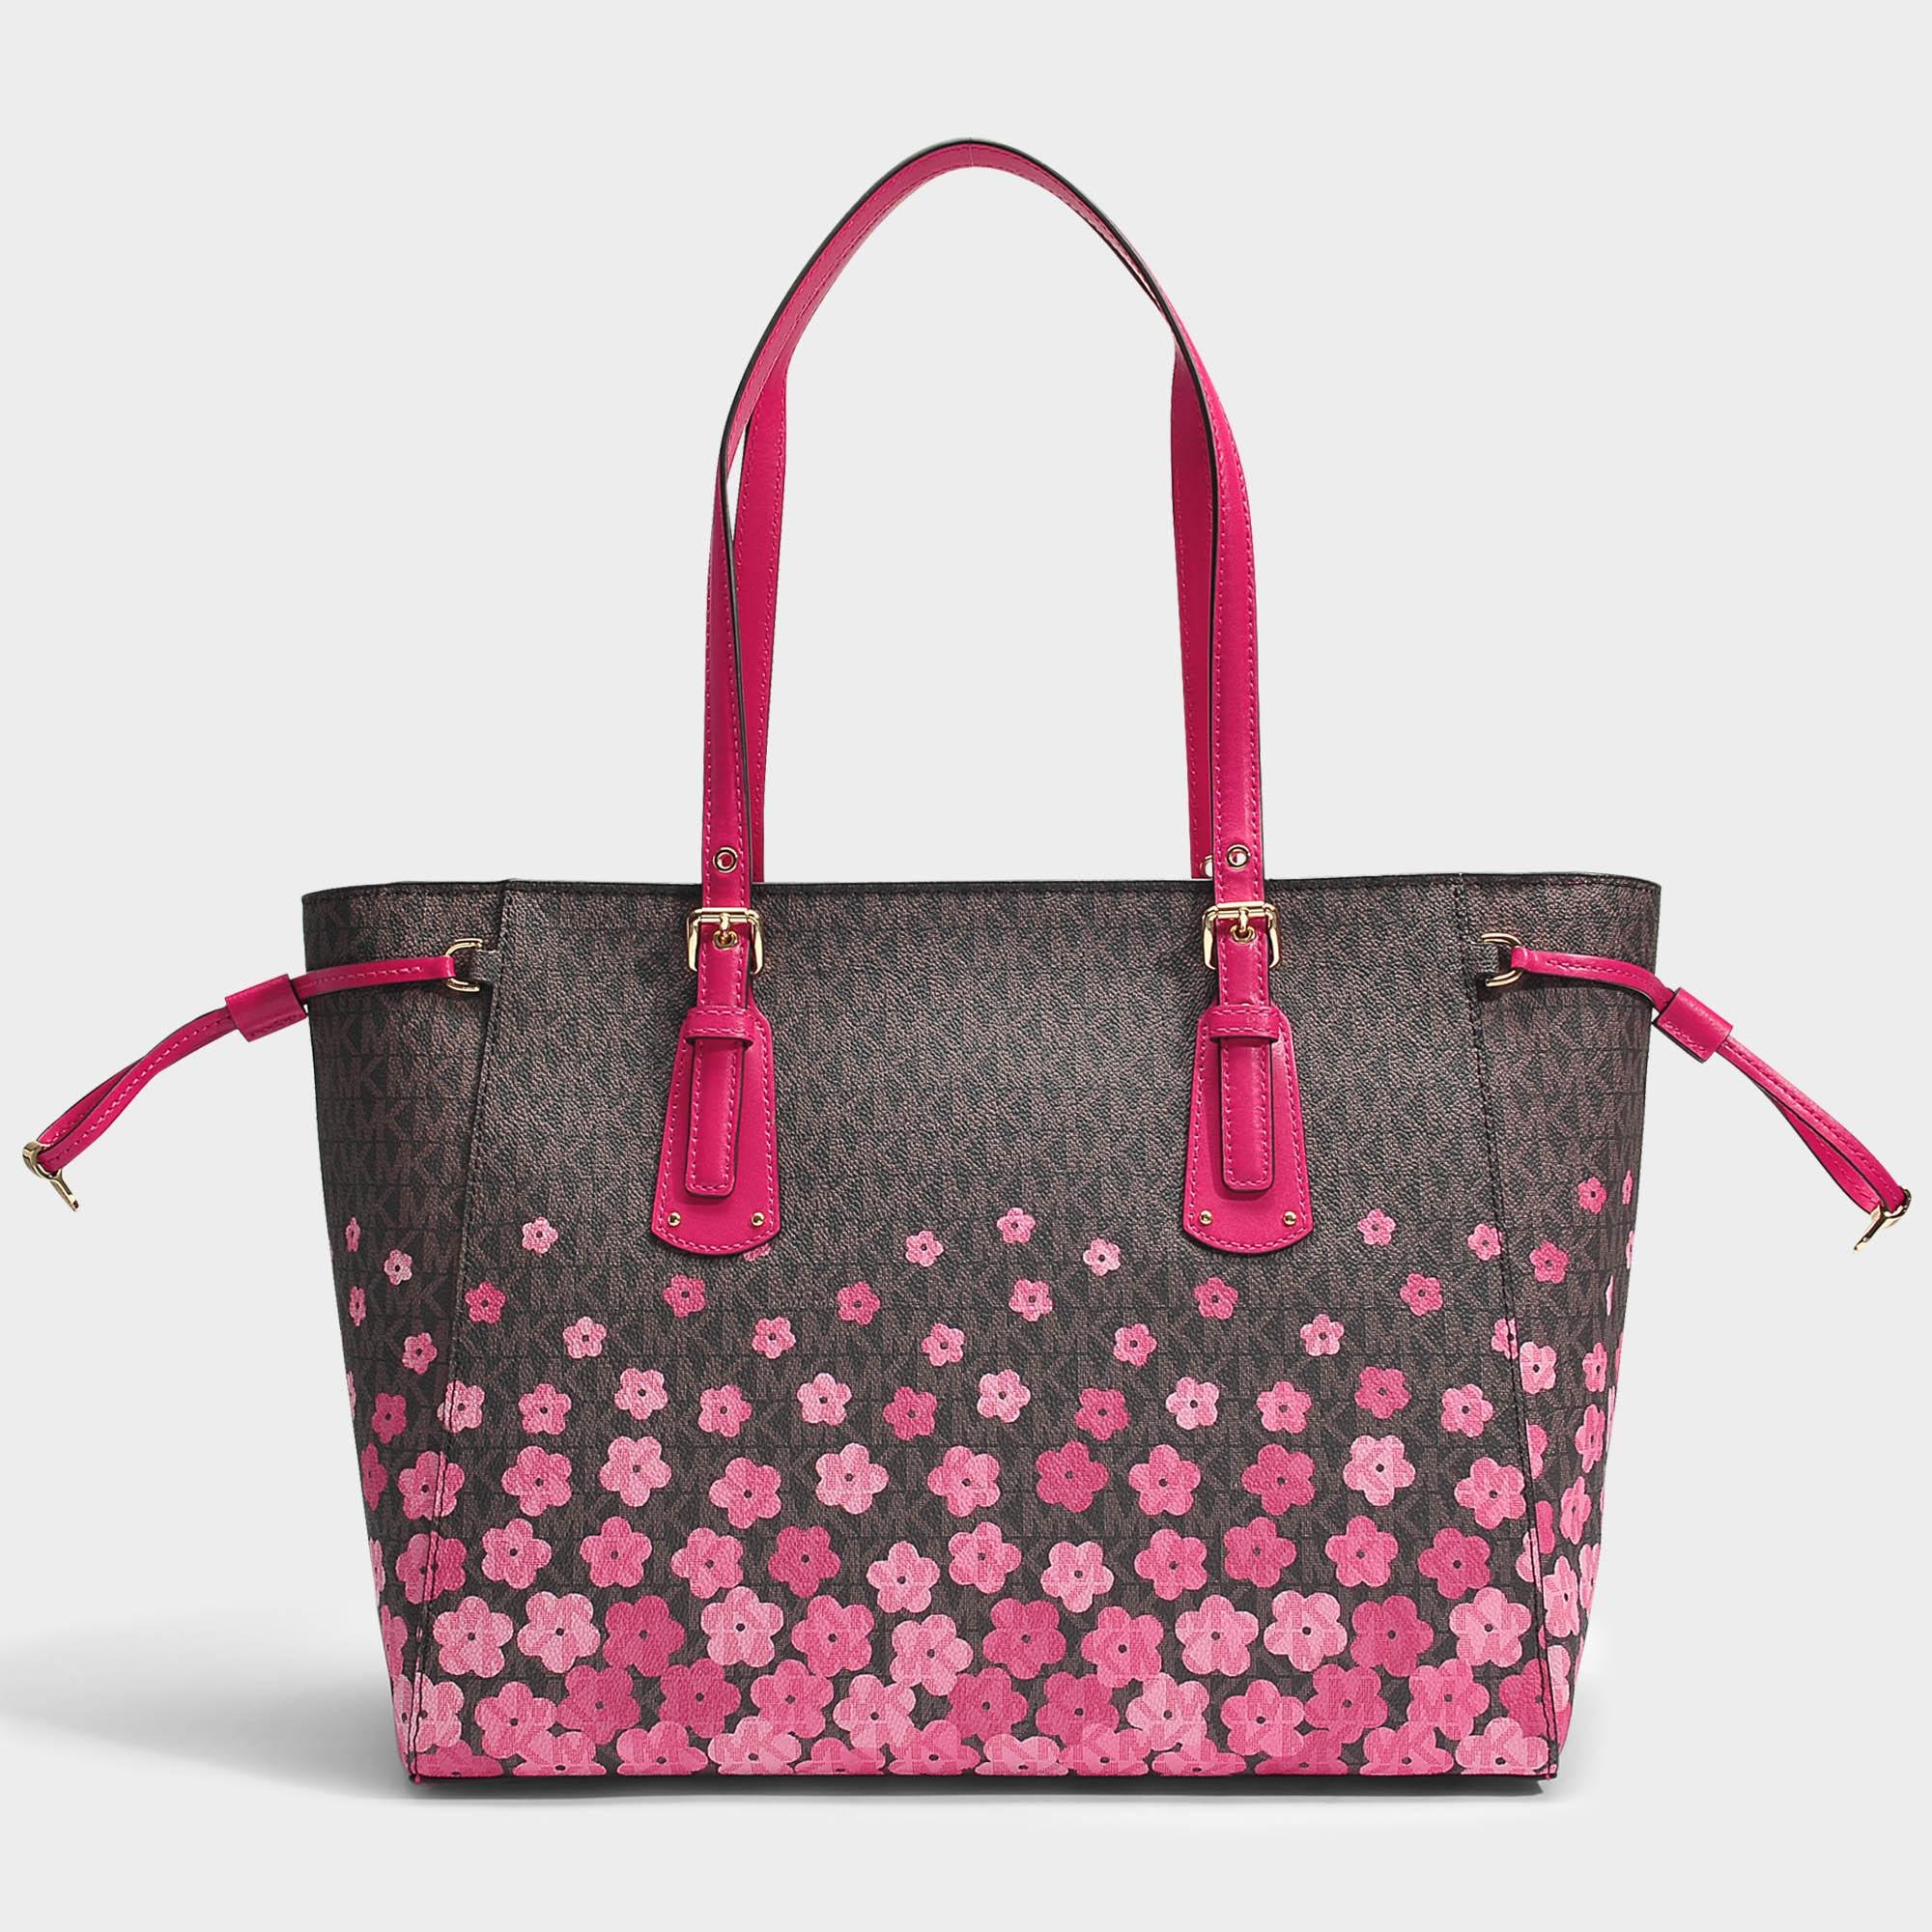 michael kors pink purse with flowers